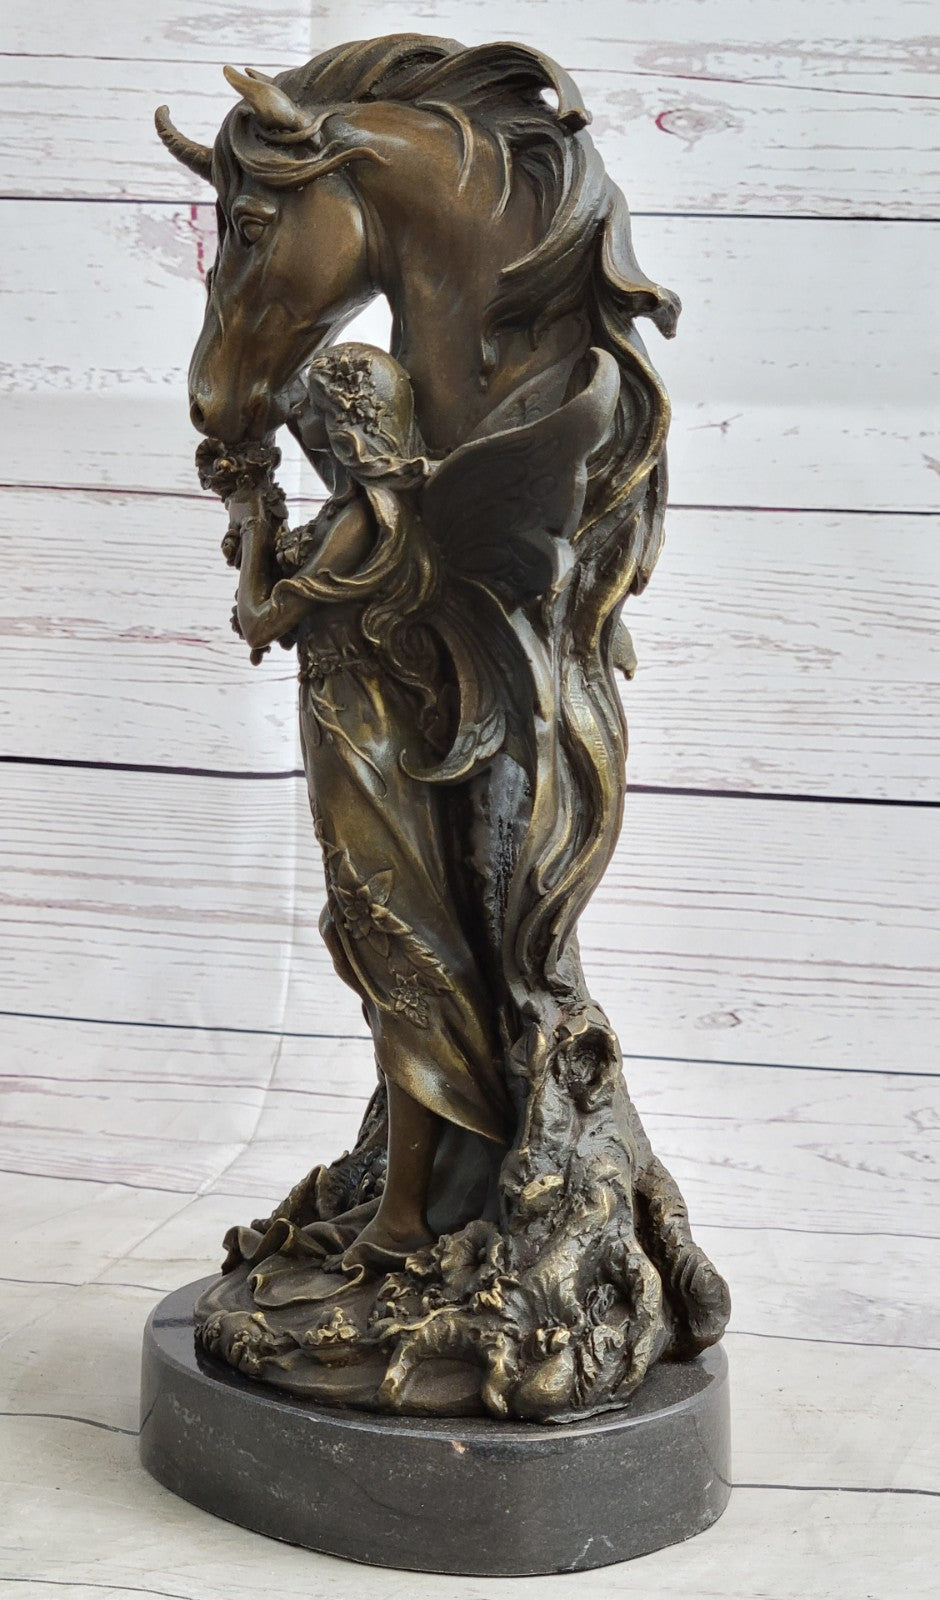 Sexy Fairy with Horse Bronze Sculpture Female Celestial Figure Gift Craft Orname